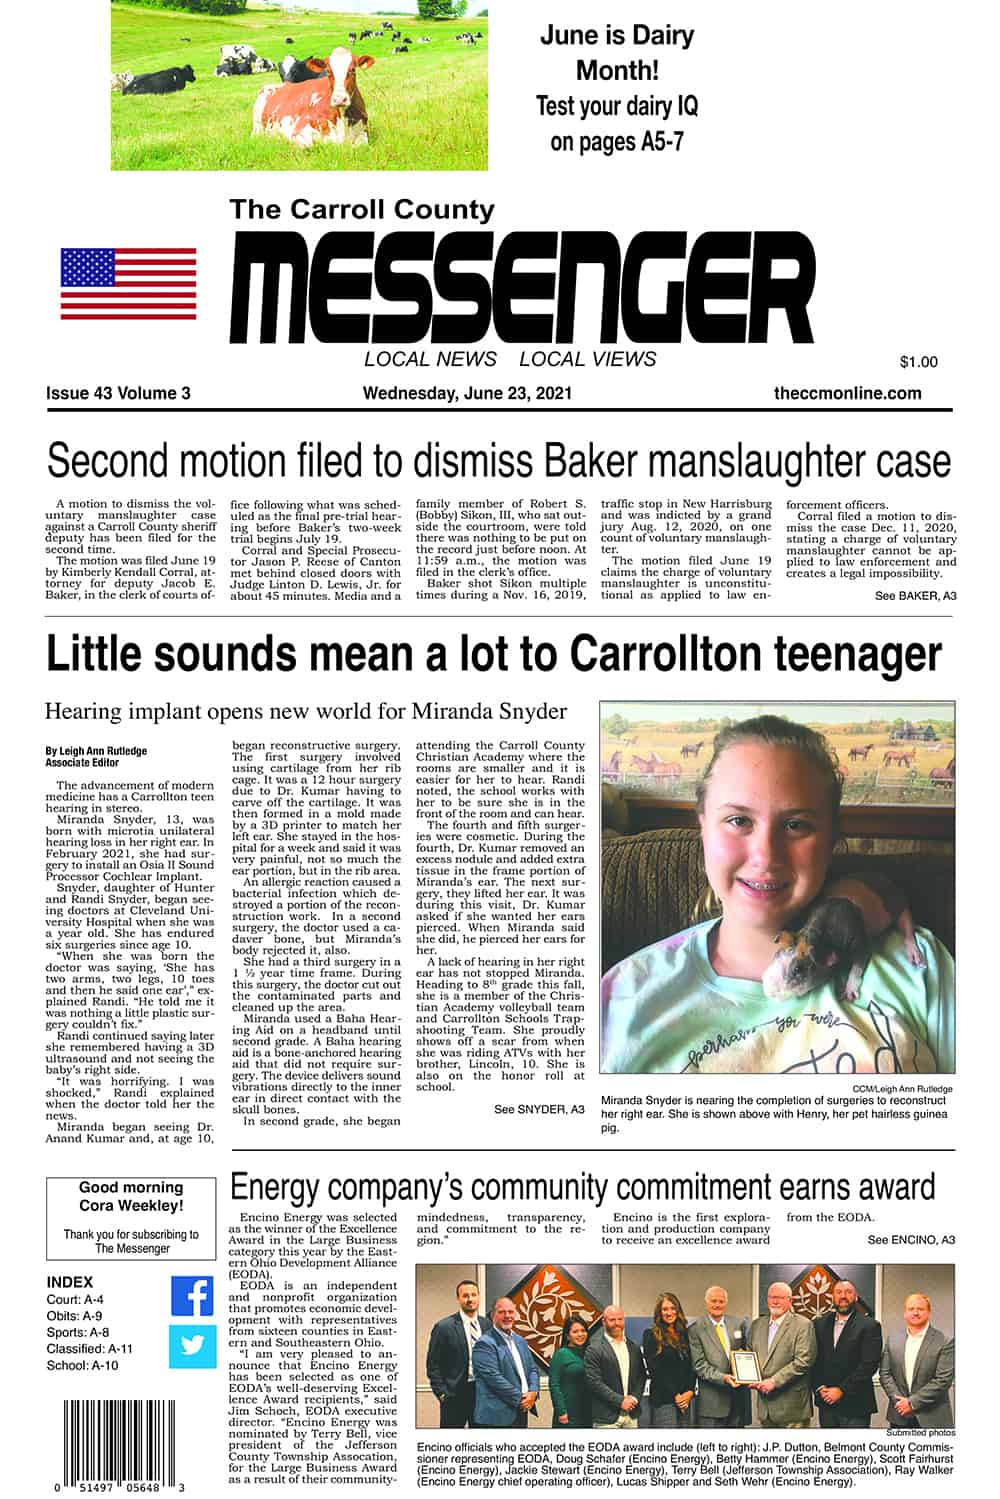 On newsstands today! The Carroll County Messenger